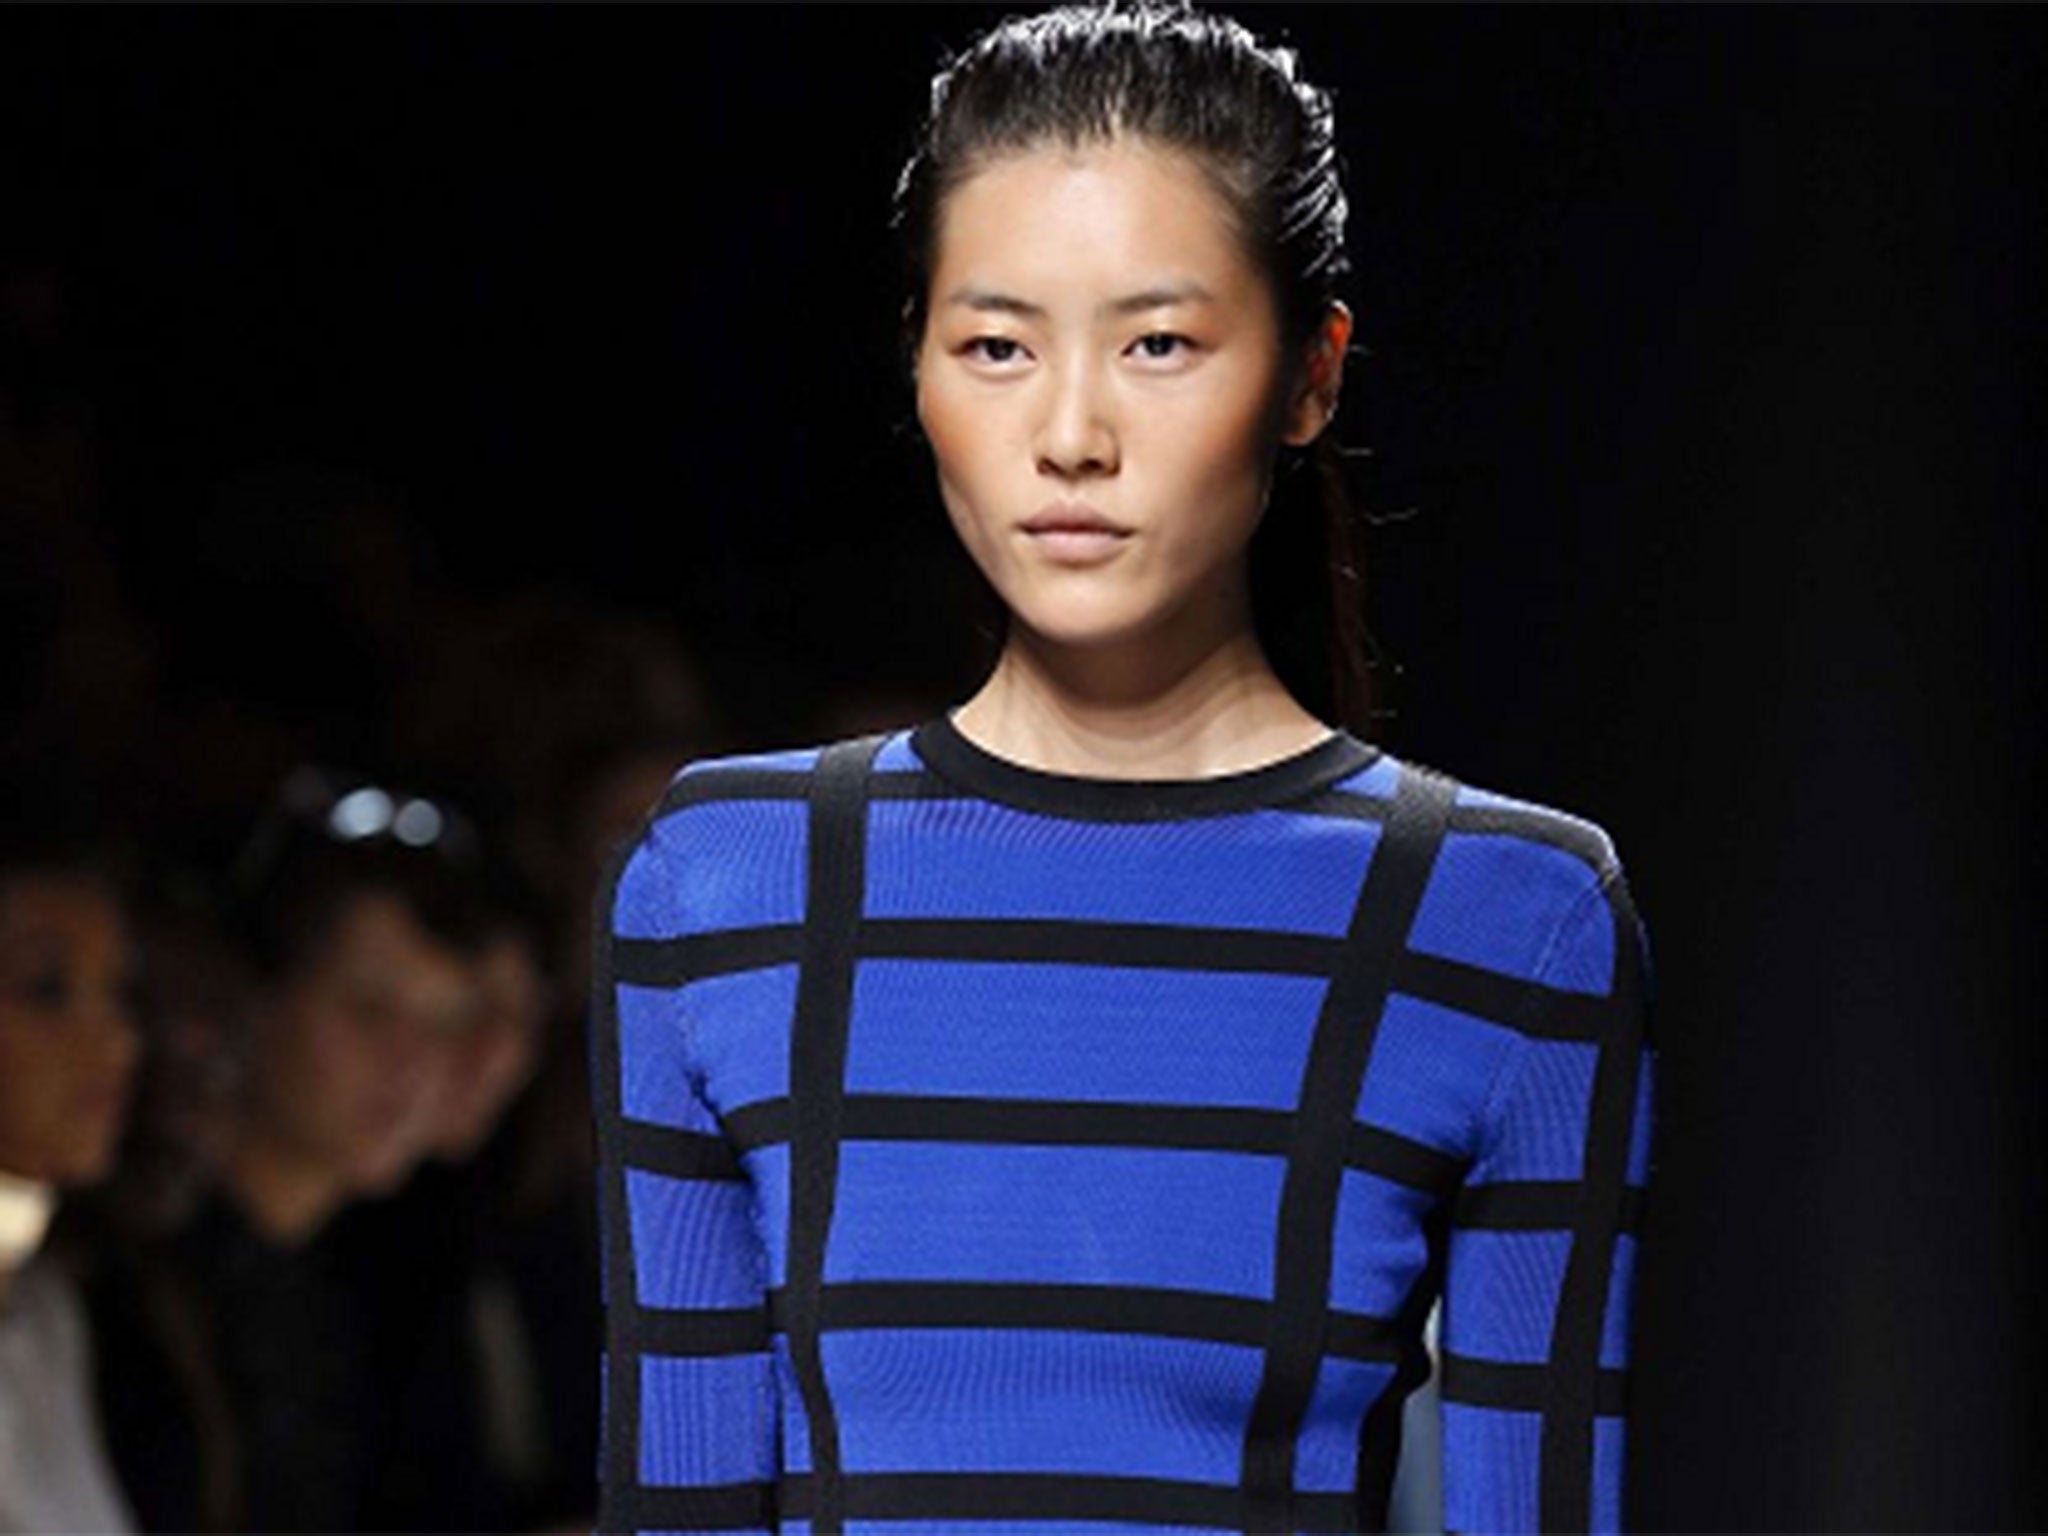 Introducing Liu Wen, the rumoured new face of the Apple Watch | The ...